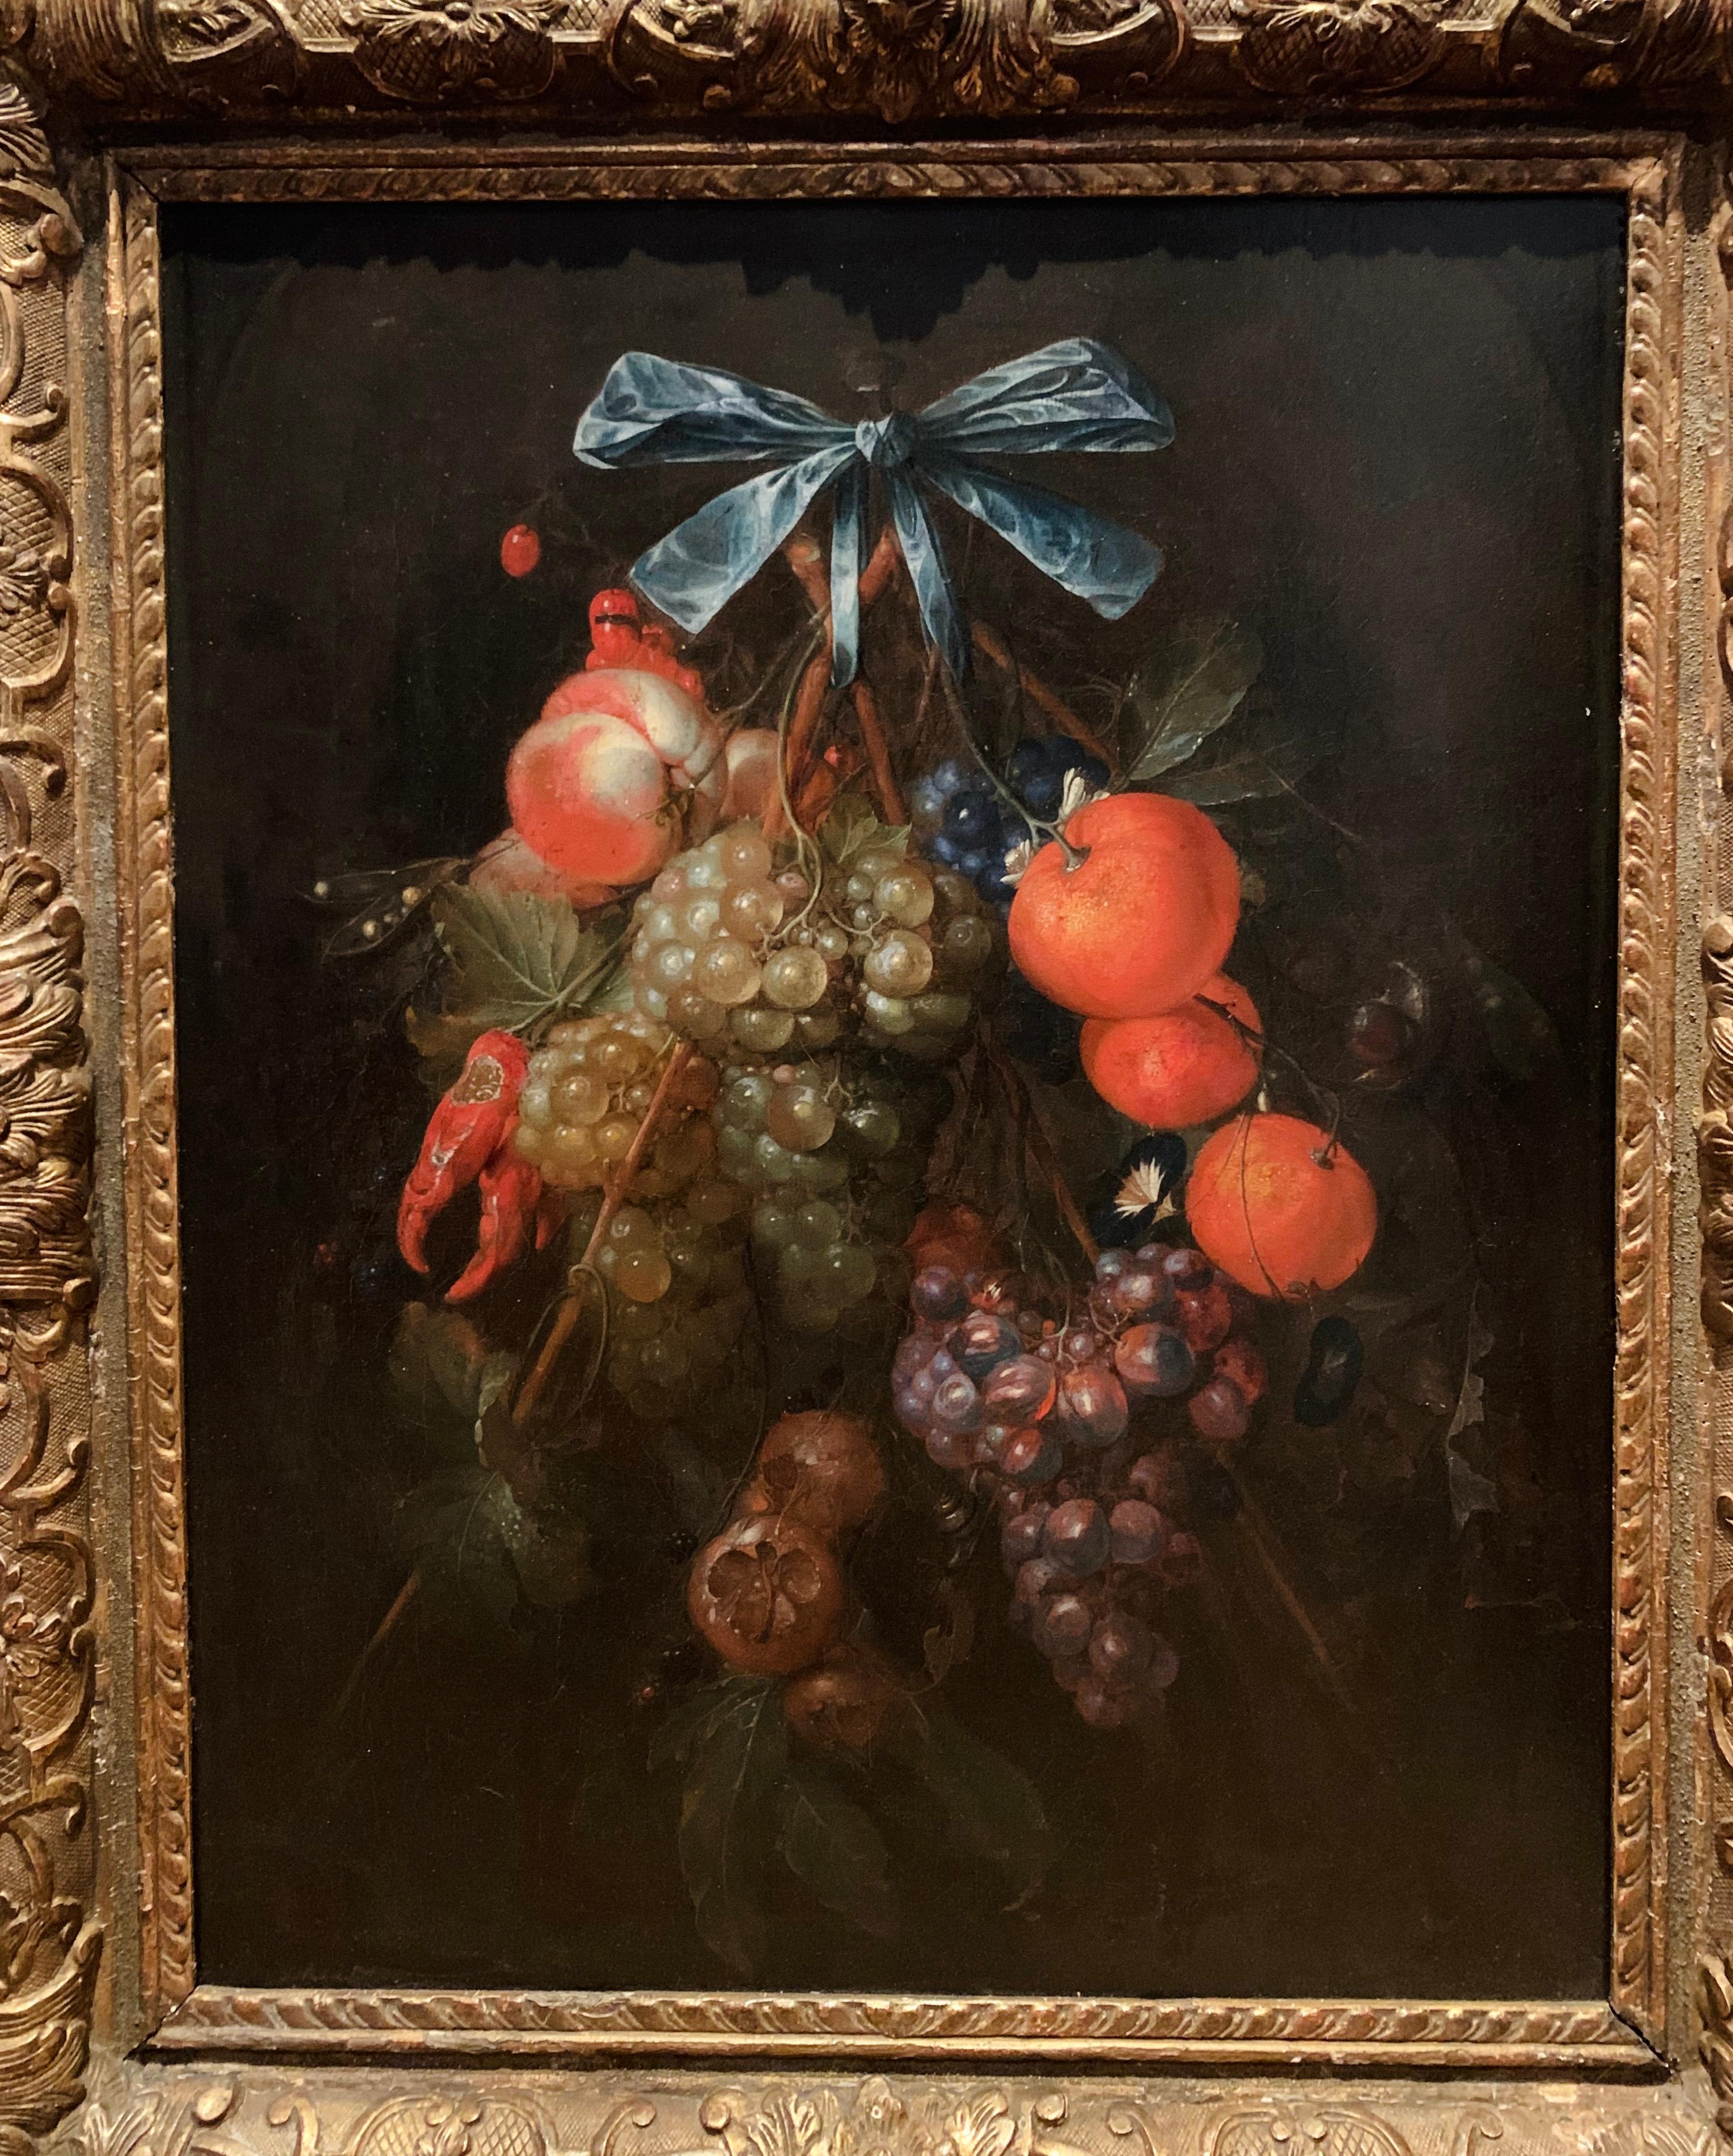 17th century dutch still-life with fruits, oranges, chili peppers and a ribbon - Old Masters Painting by Cornelis de Heem